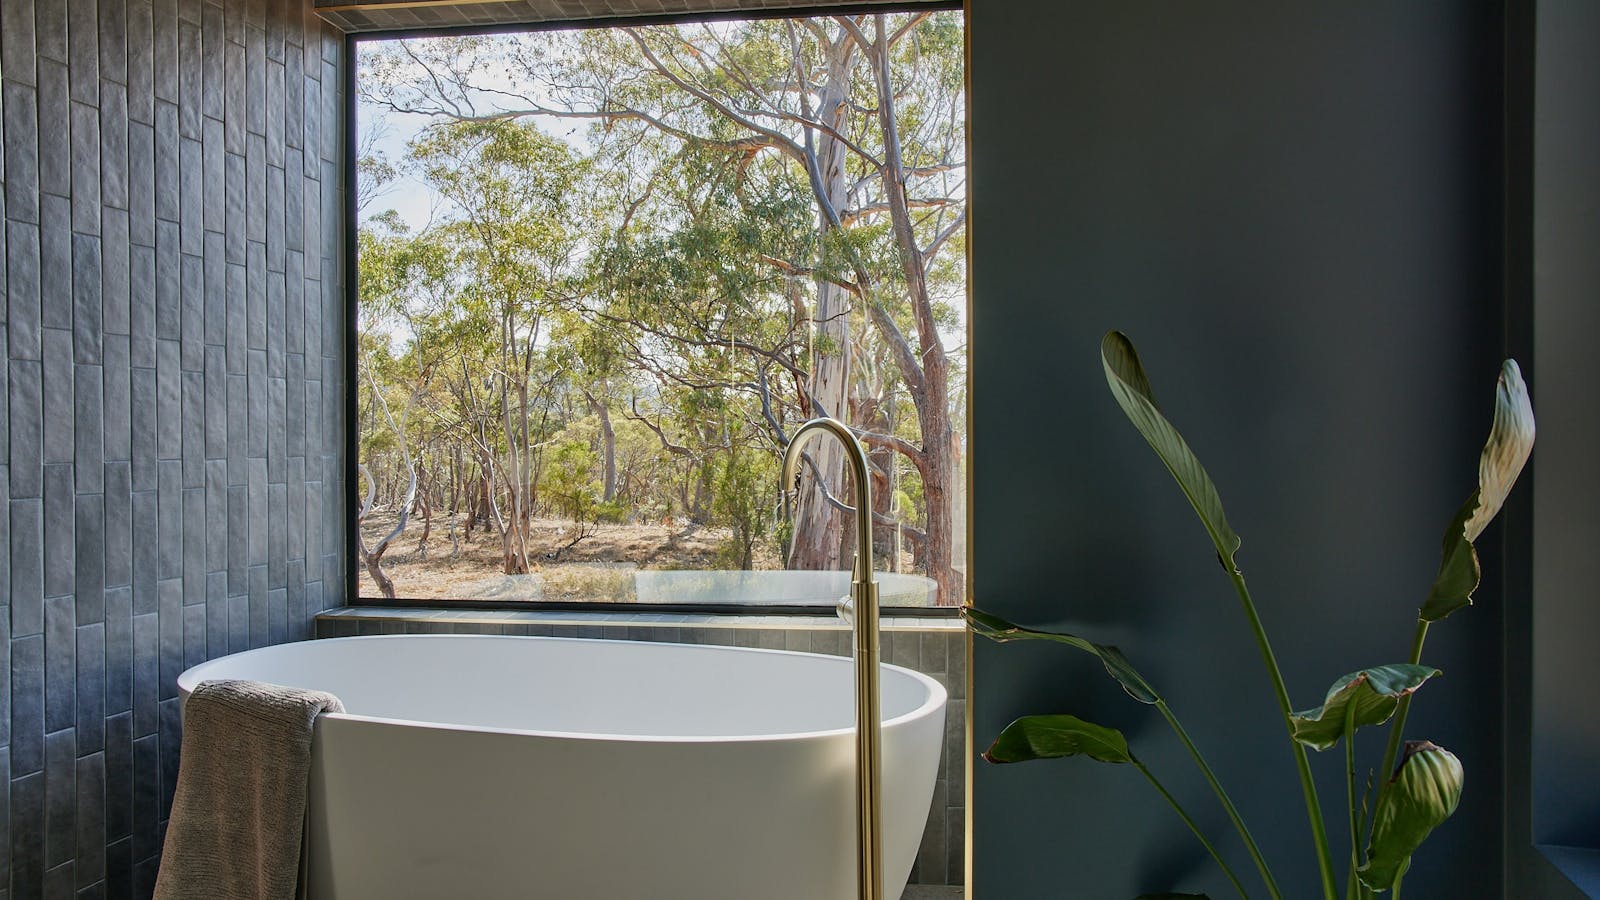 The bathroom makes the most of the bush setting